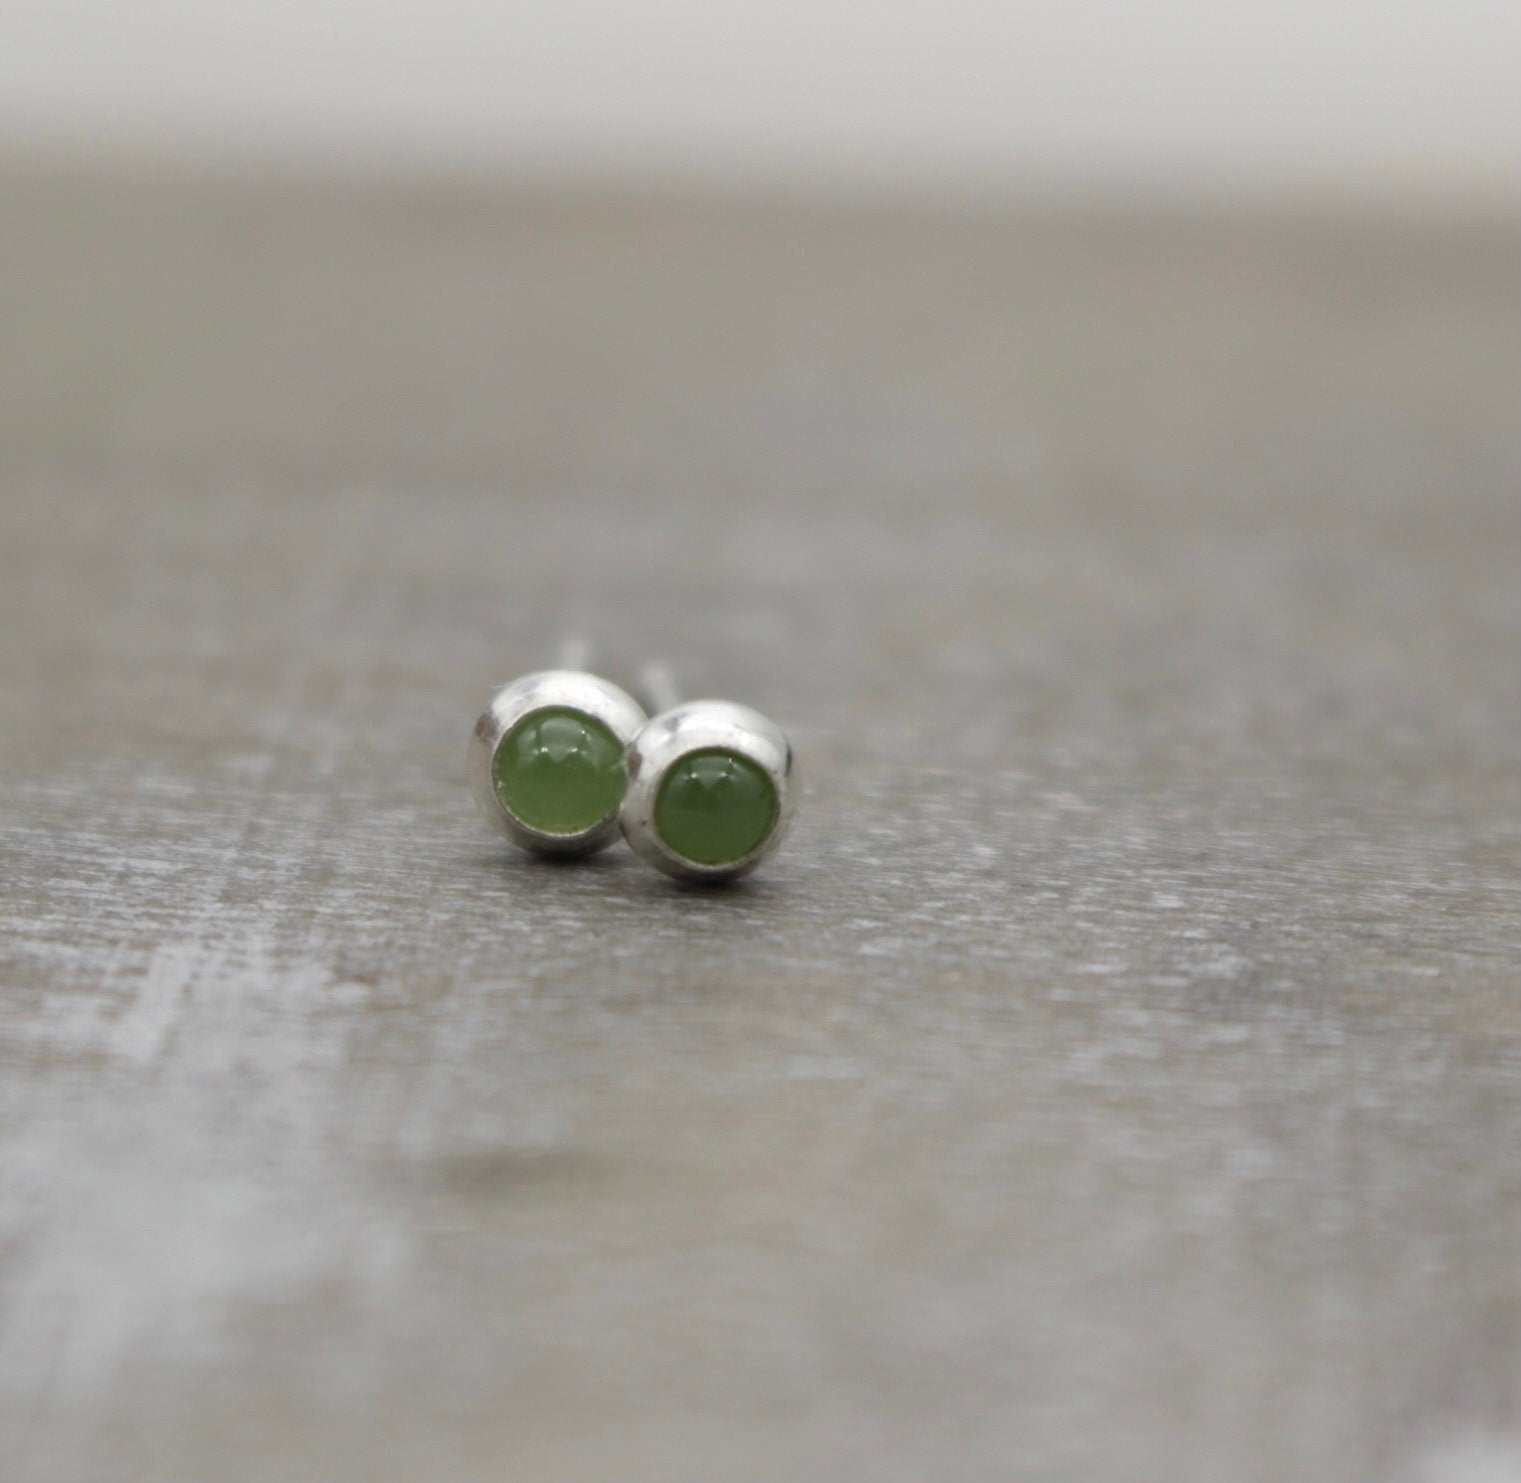 Tiny Jade Stud Earrings - sterling silver earring - Jade Jewelry - 3mm Studs - Gift for Her